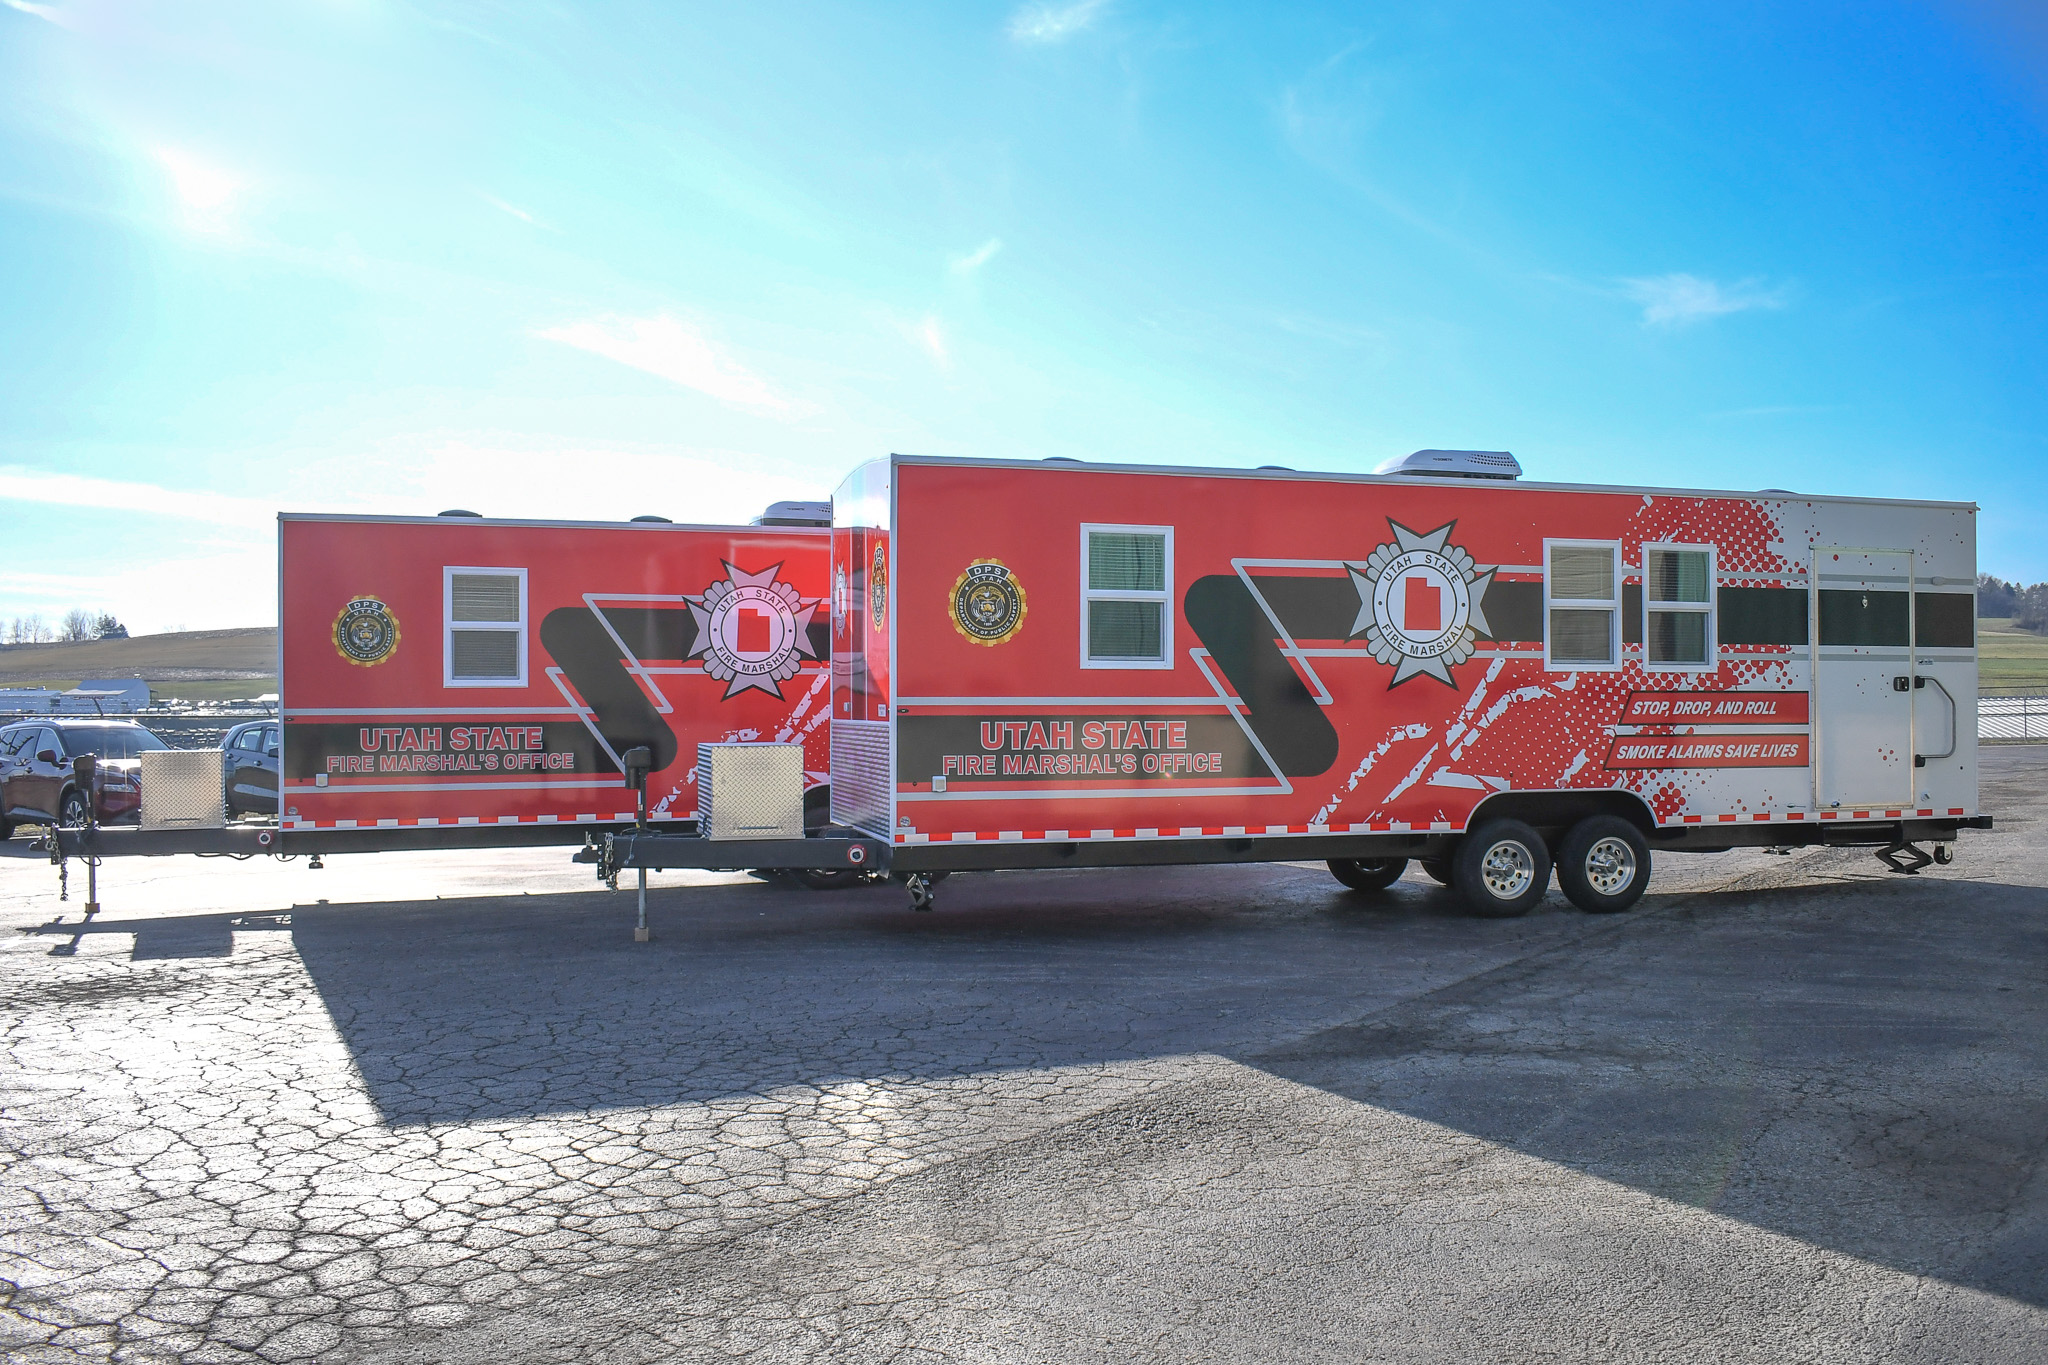 An exterior view of the units for Sandy, UT.